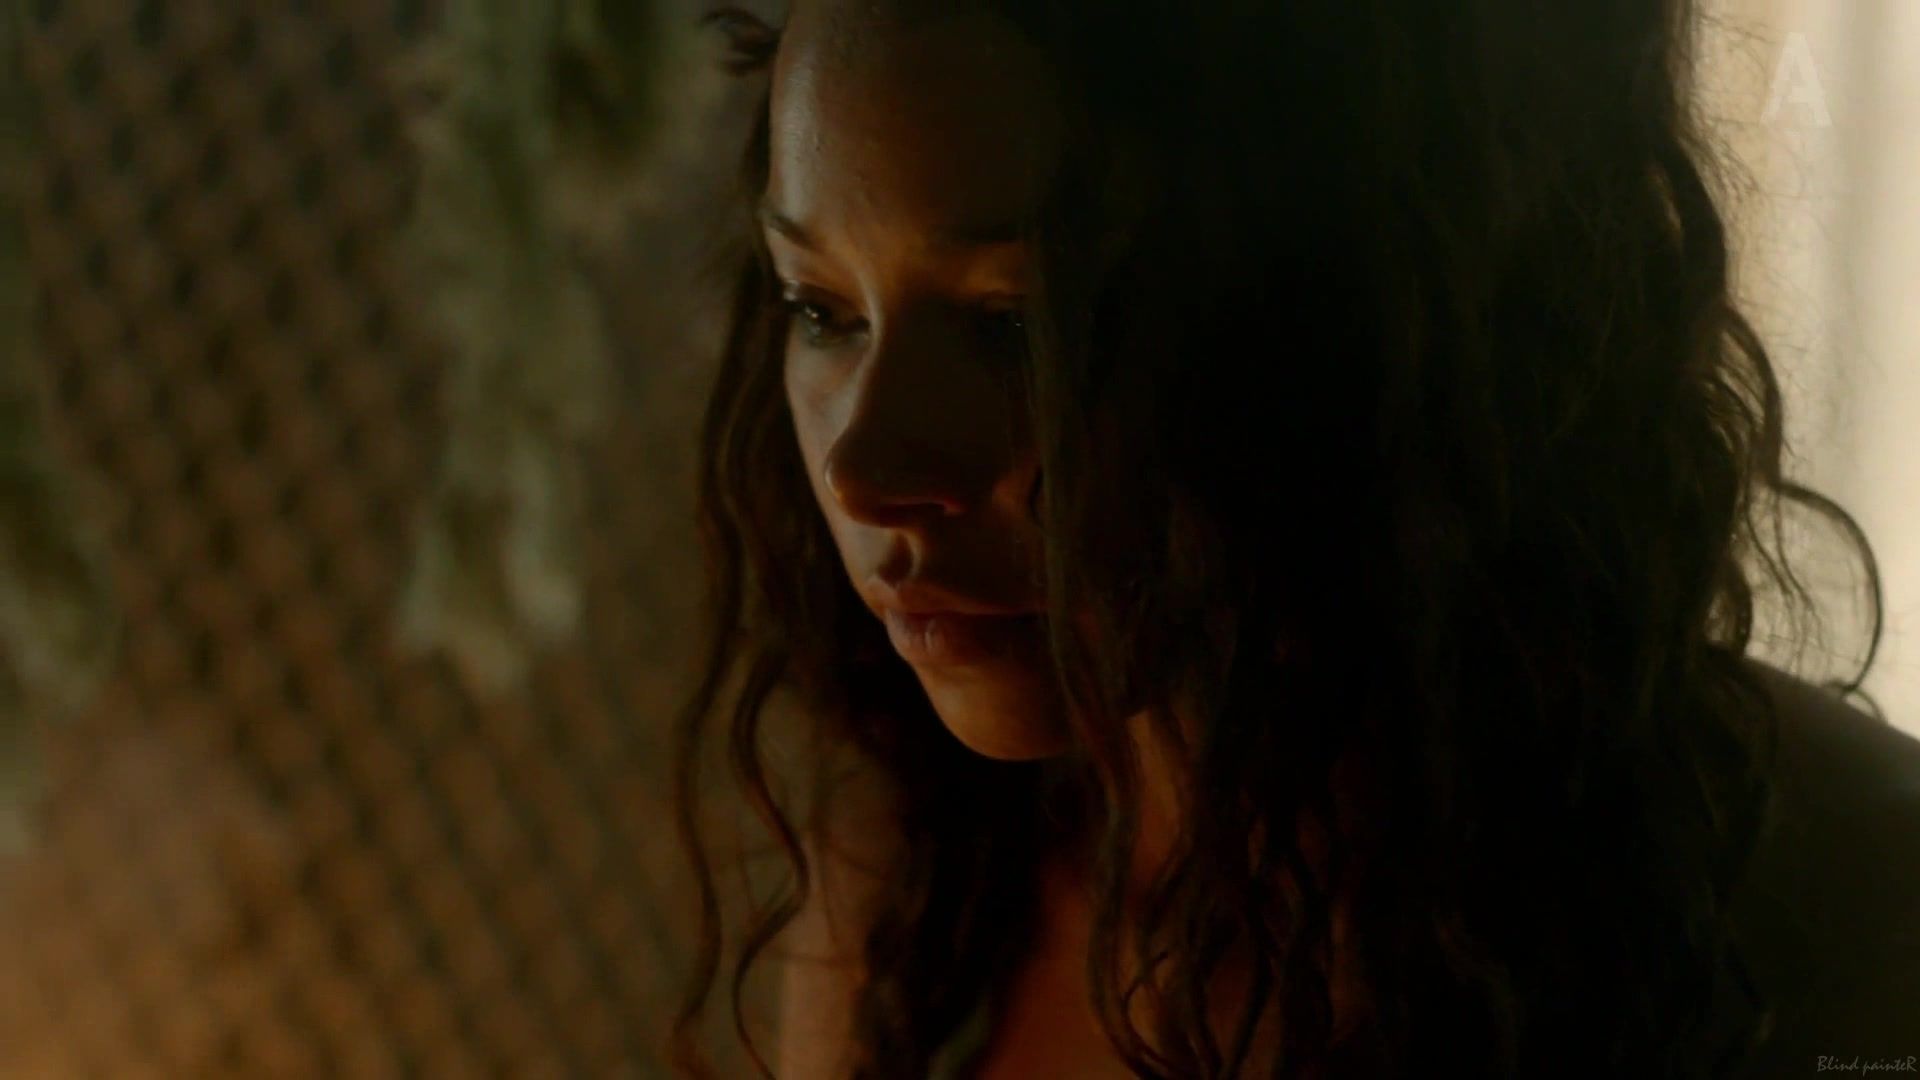 Babe Louise Barnes & Jessica Parker Kennedy - Black Sails S01E04 (2014) Real Couple - 1